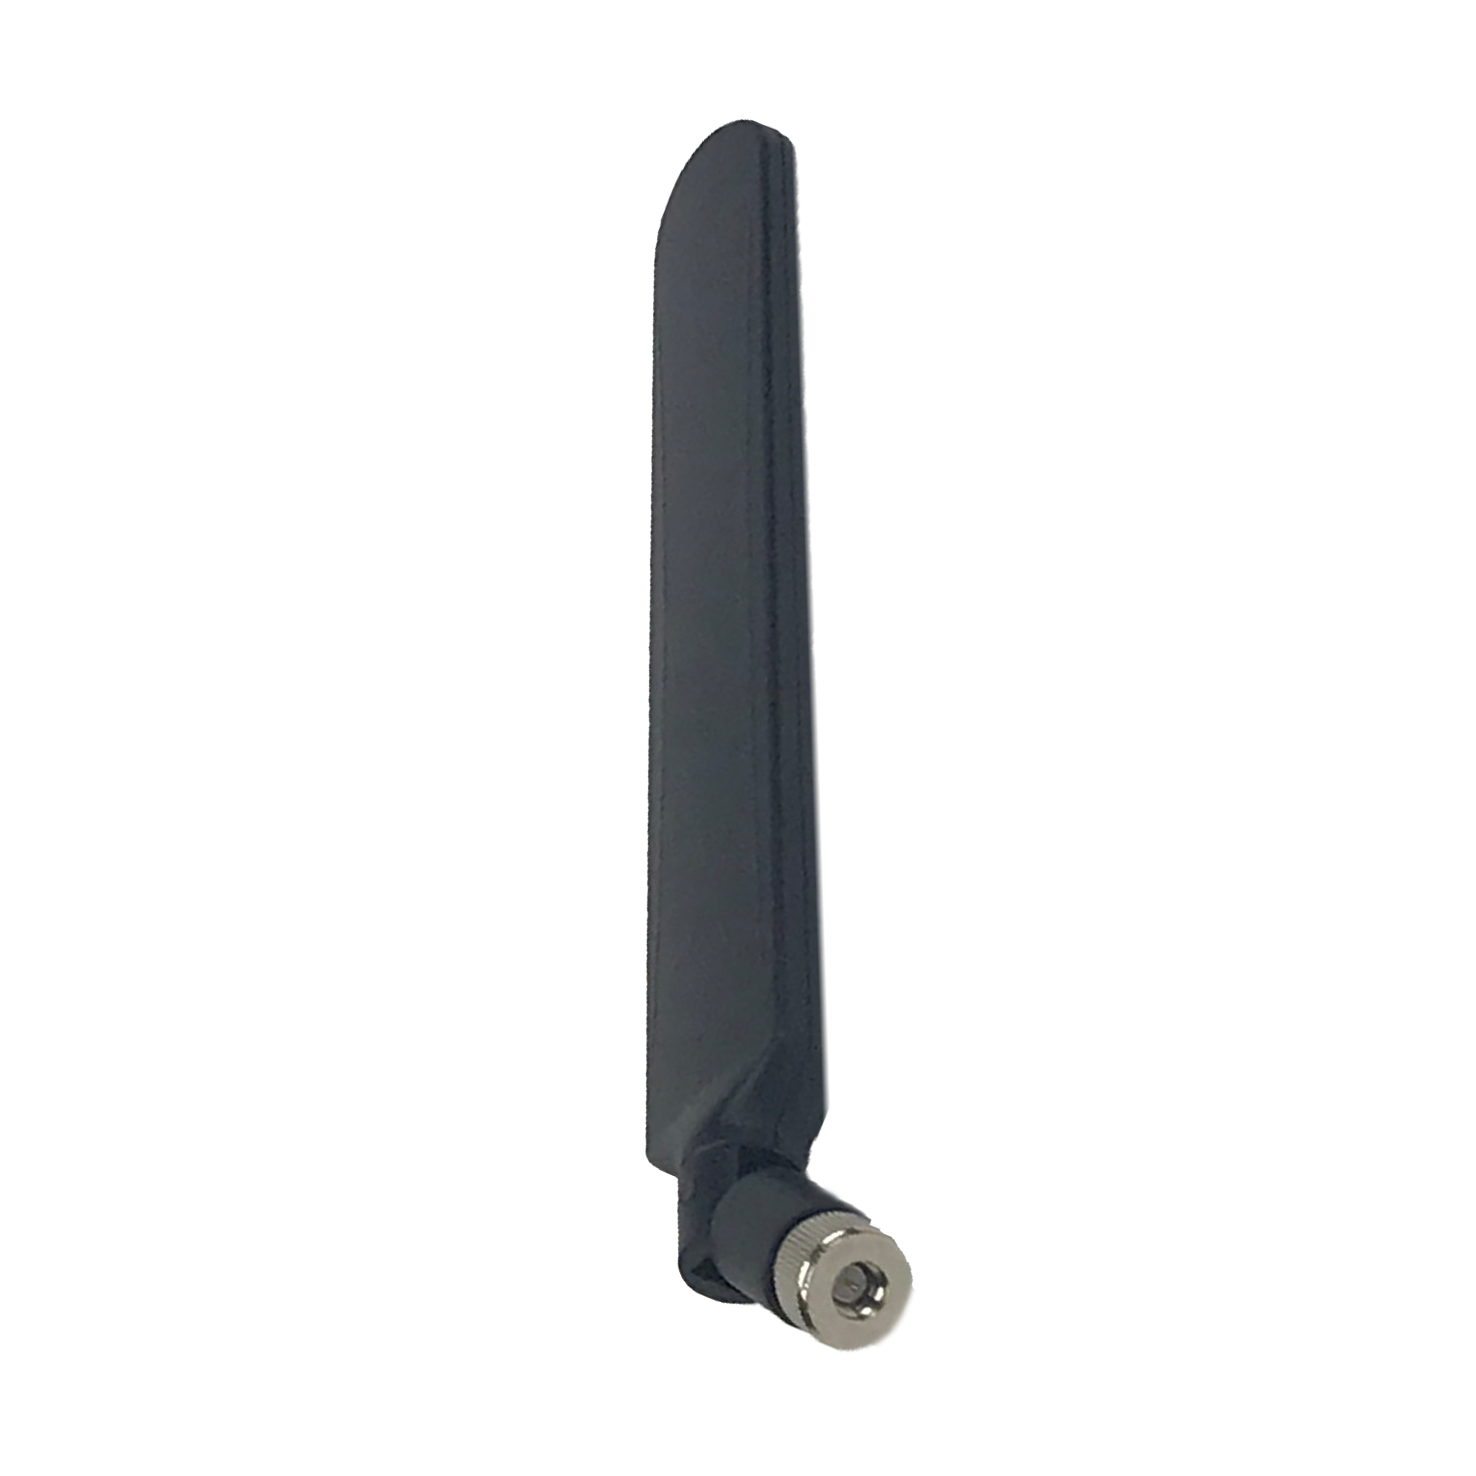 3G/4G/LTE Antenna with High Performance and High Efficiency with RP SMA Male connector